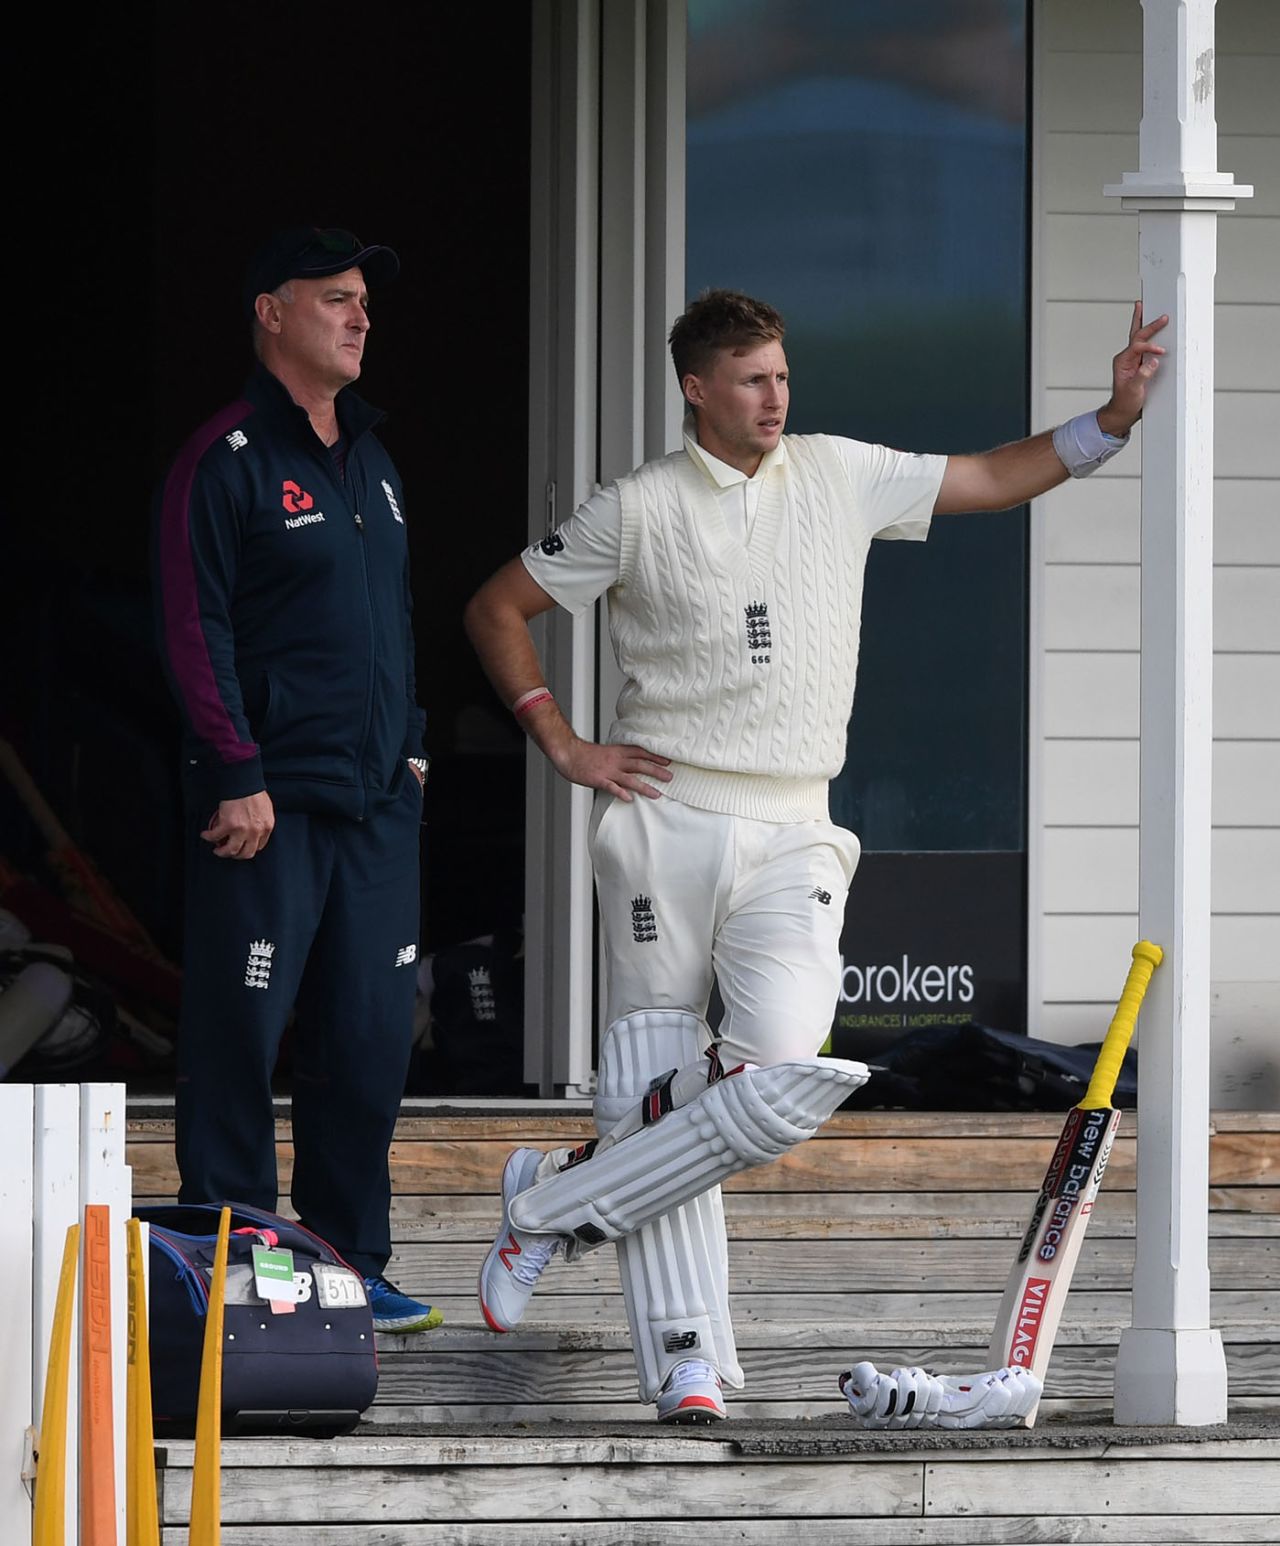 England captain Joe Root watches play alongside batting coach Graham Thorpe during the tour match between New Zealand XI and England in Whangarei, November 12, 2019